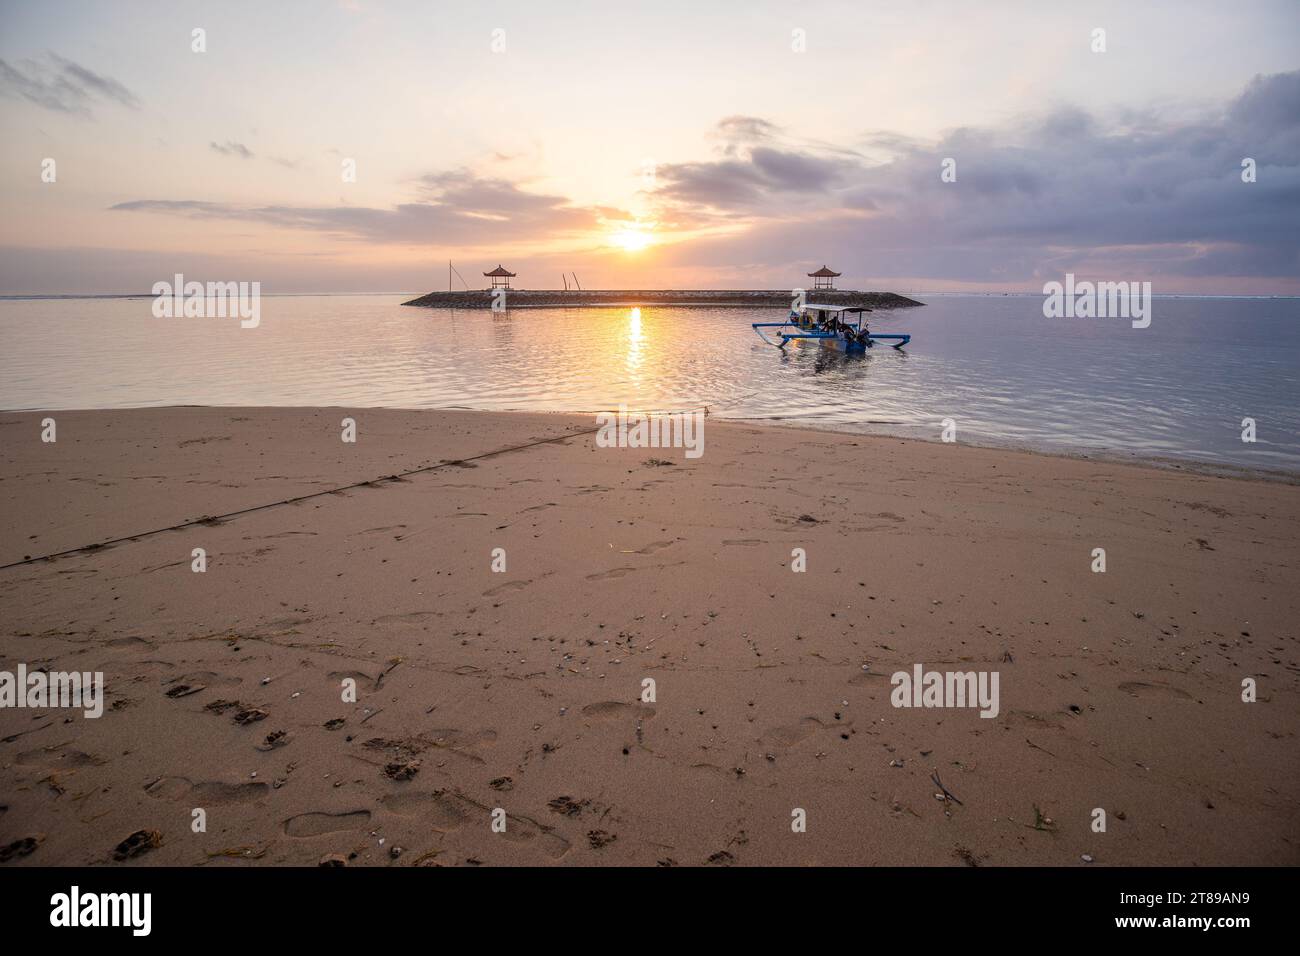 Sunrise at the sandy beach of Sanur. Temple in the water. Traditional fishing boat, Jukung on the beach. Hindu faith in Sanur on Bali. Dream island Stock Photo